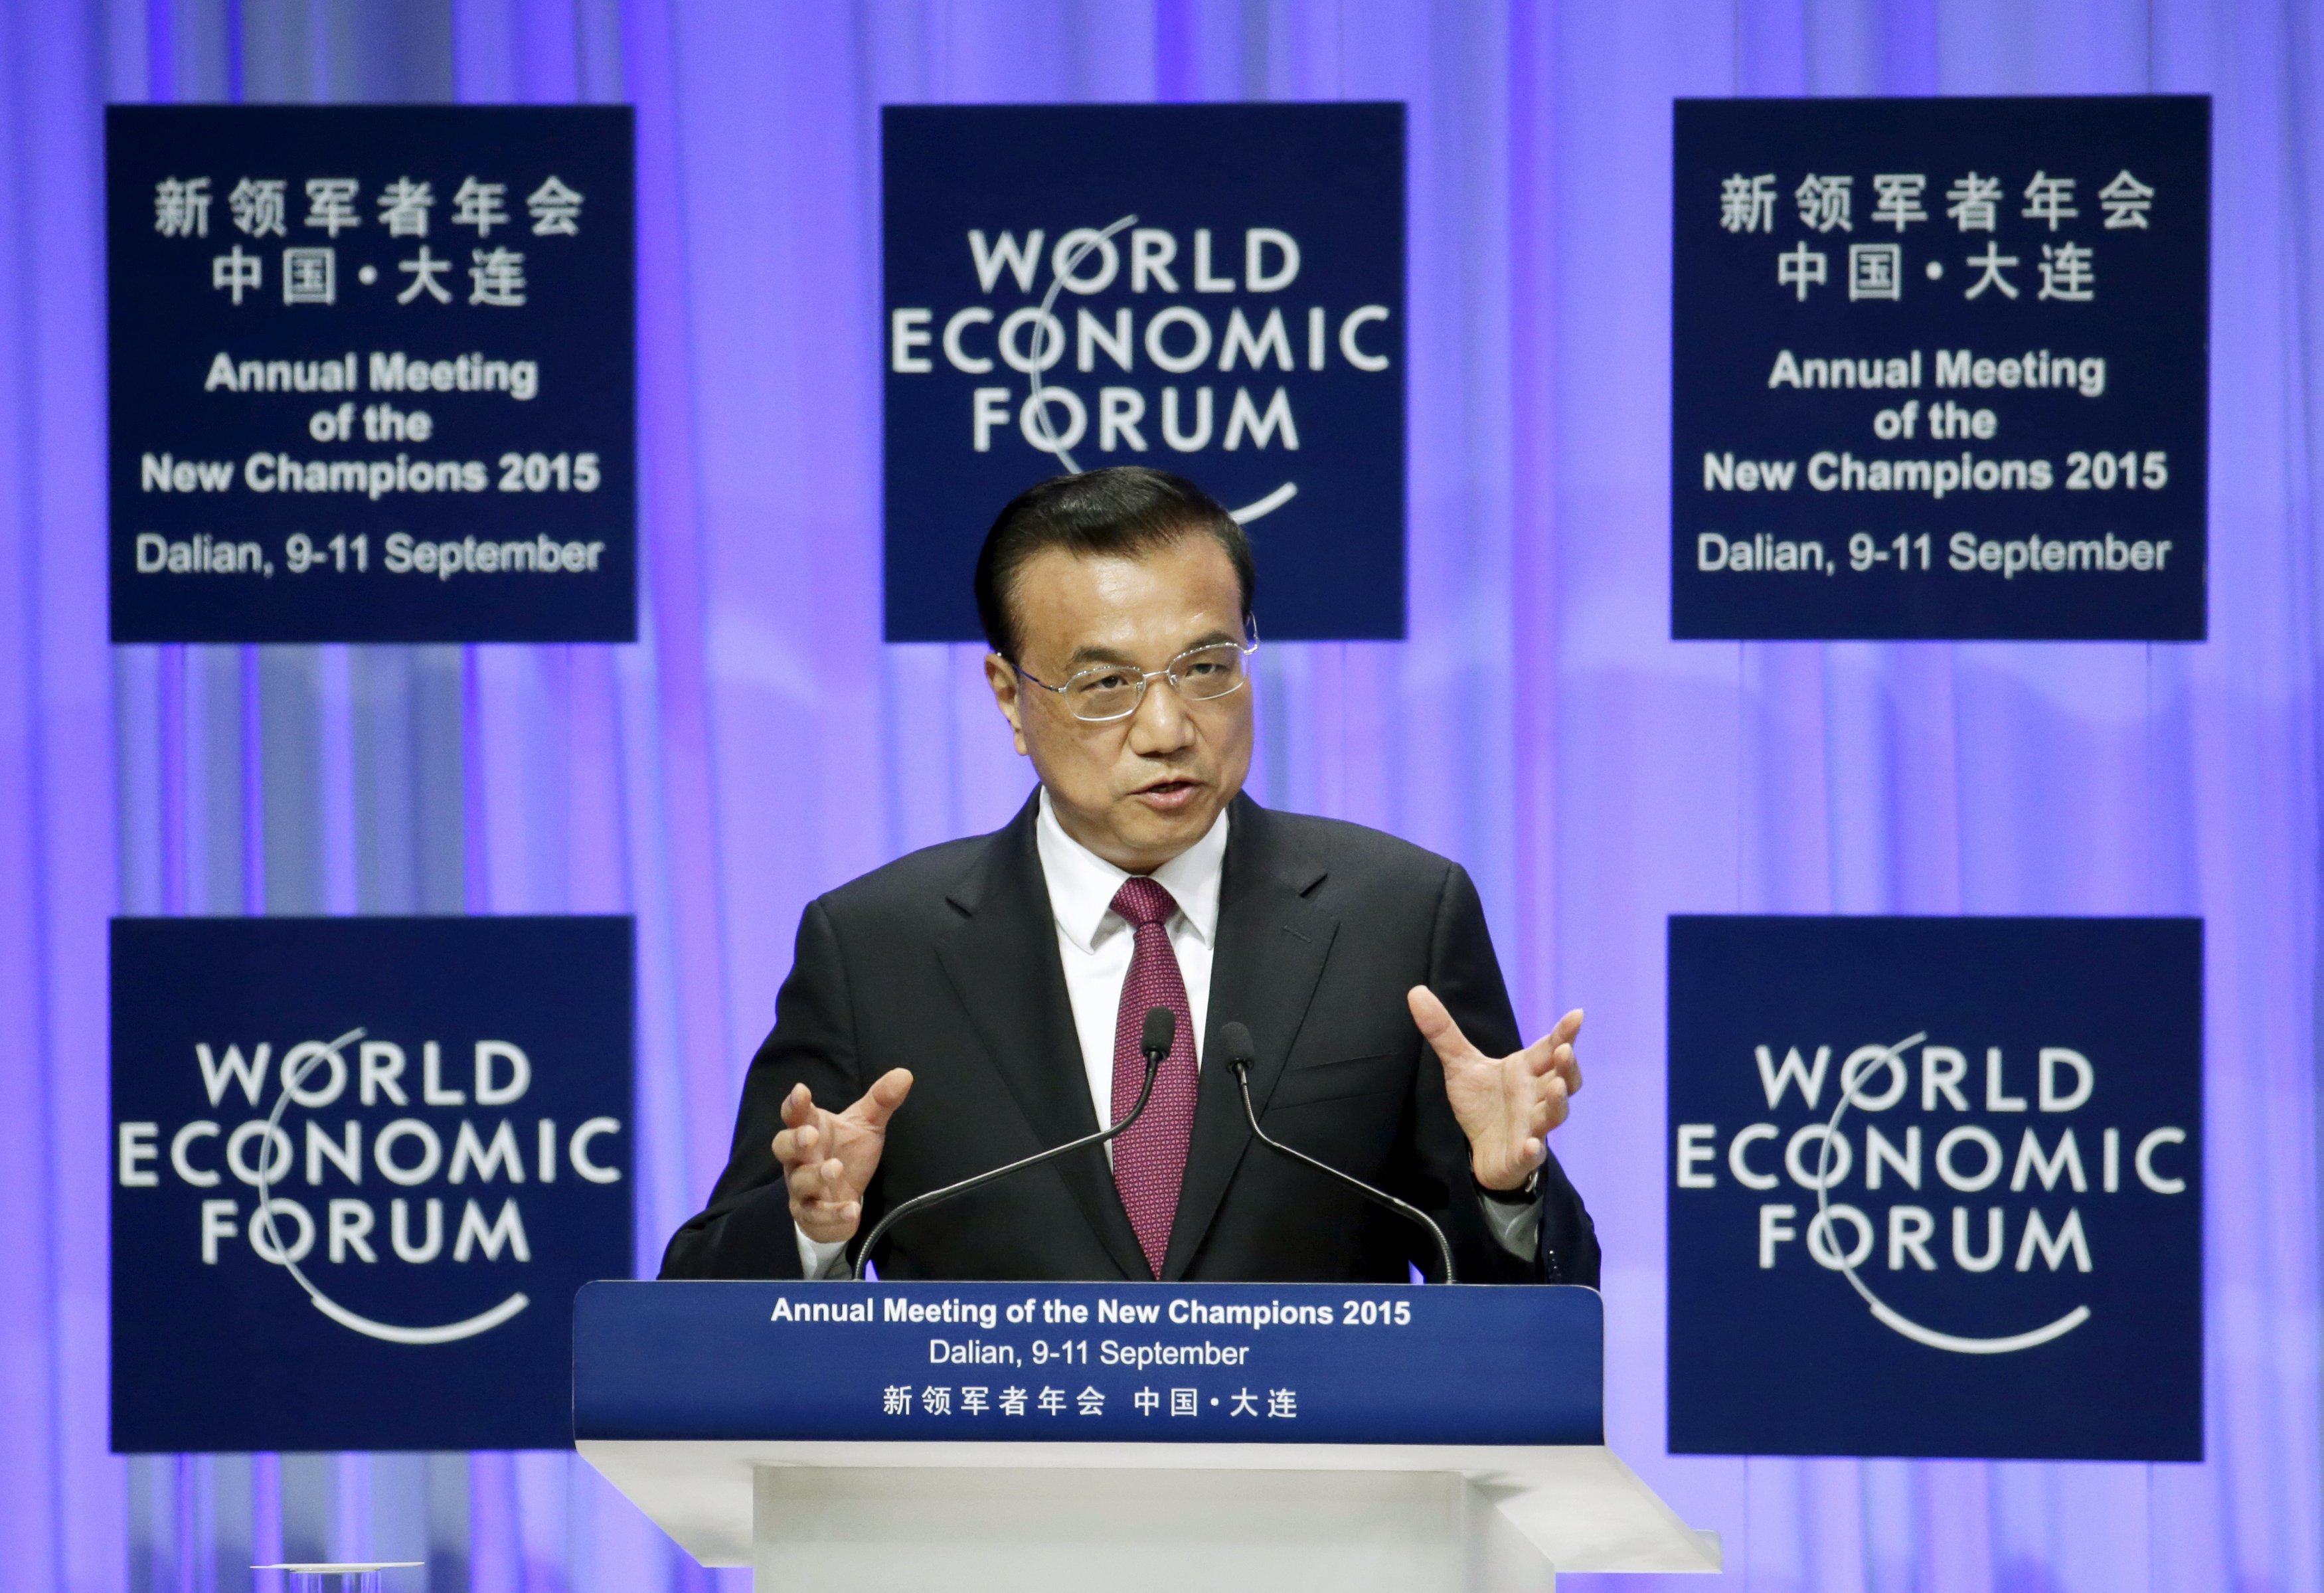 Premier Li Keqiang delivers a speech at the opening ceremony of the World Economic Forum in Dalian. Photo: Reuters